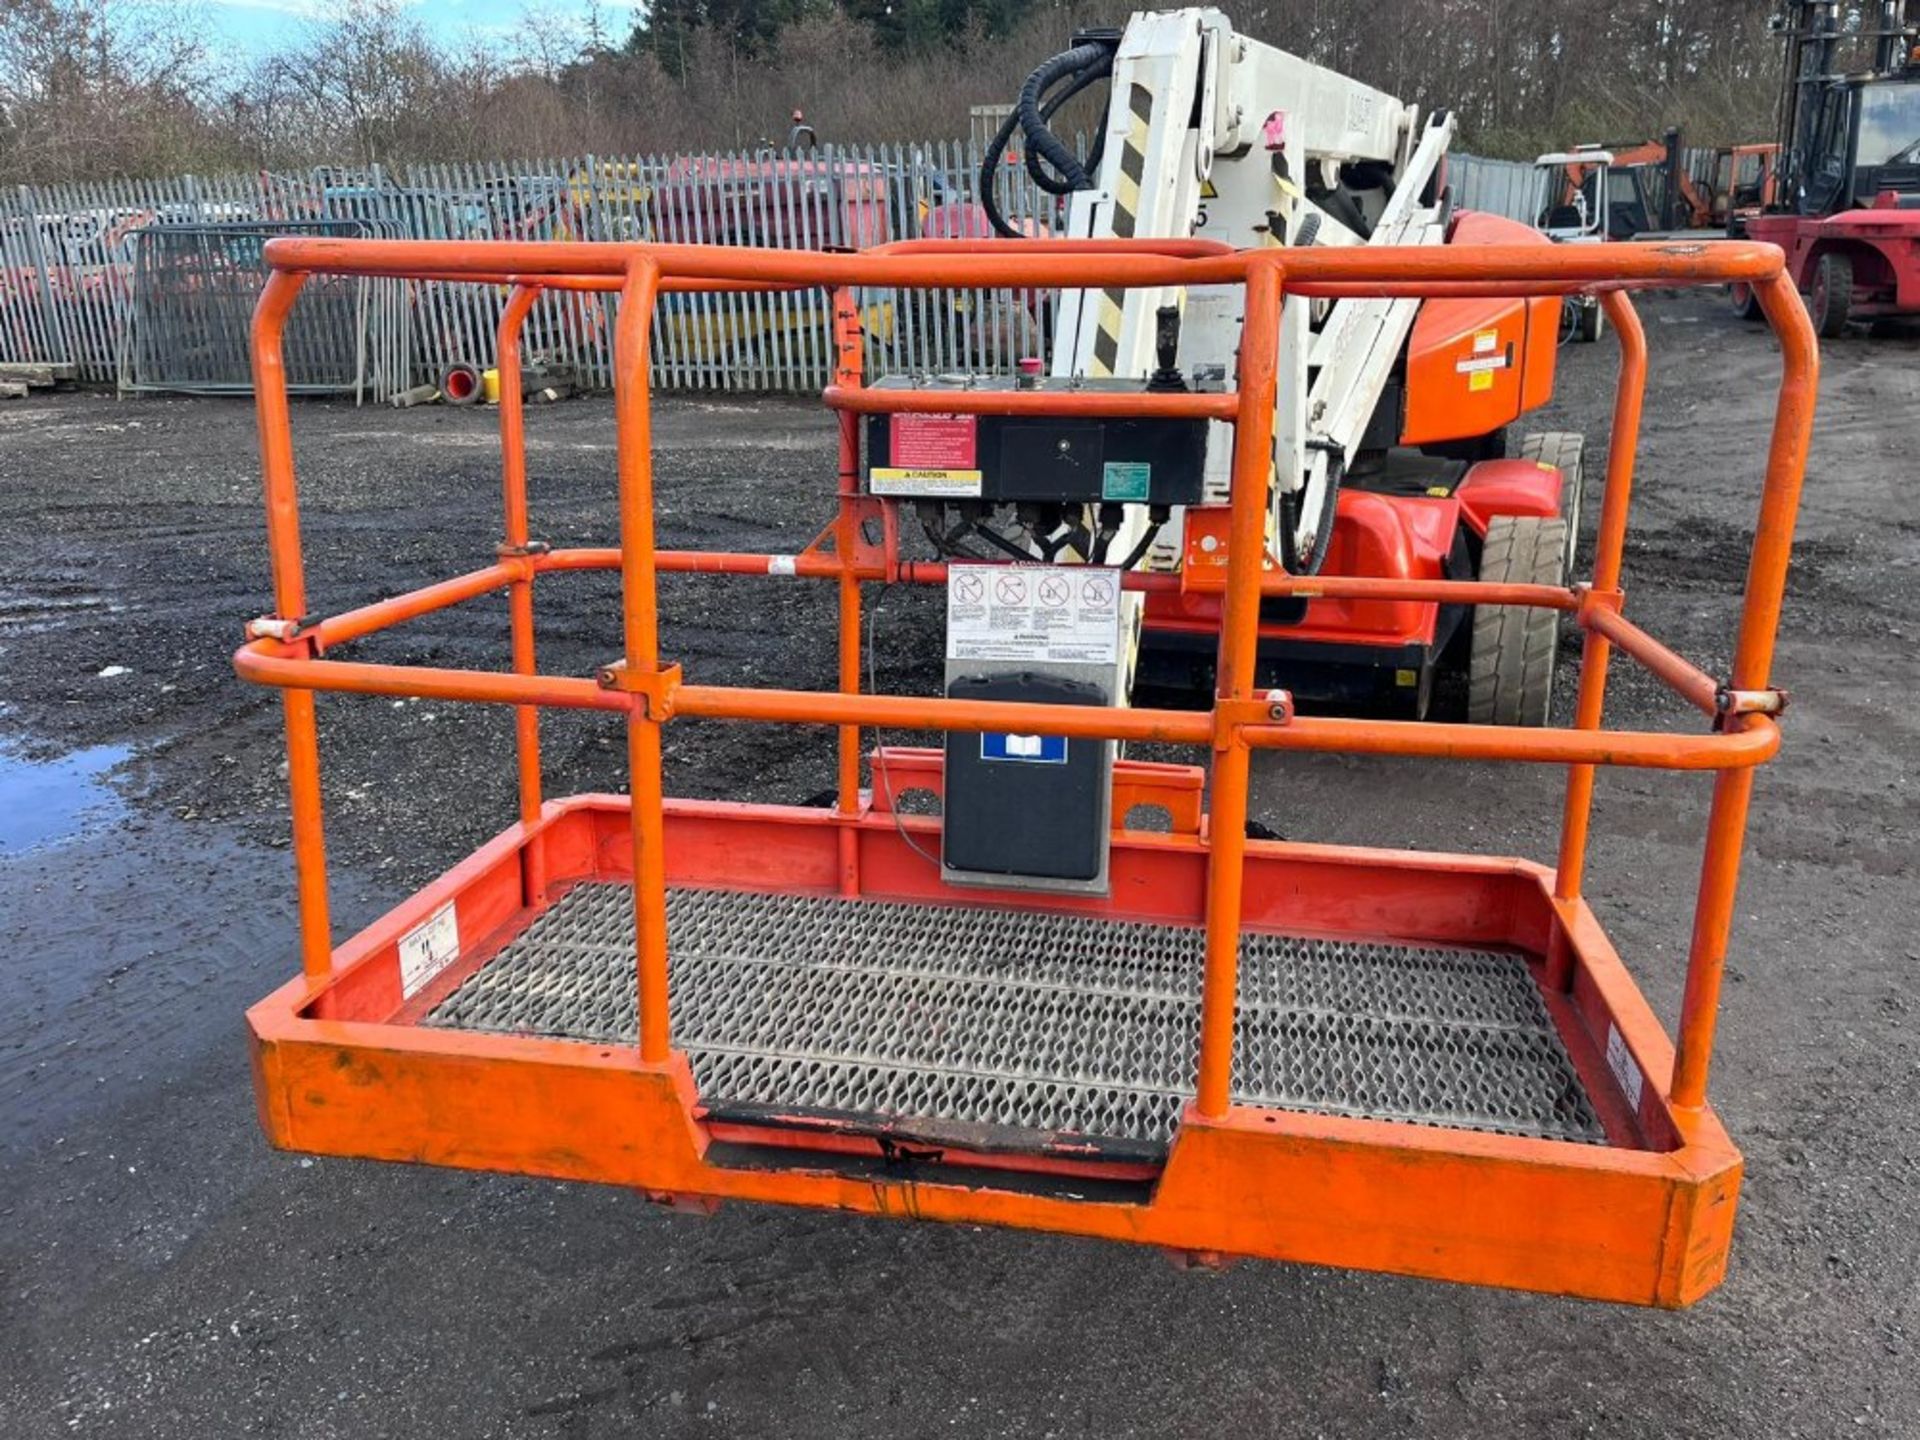 SNORKEL A46 JE BOOM LIFT YEAR 2015 - Image 4 of 14